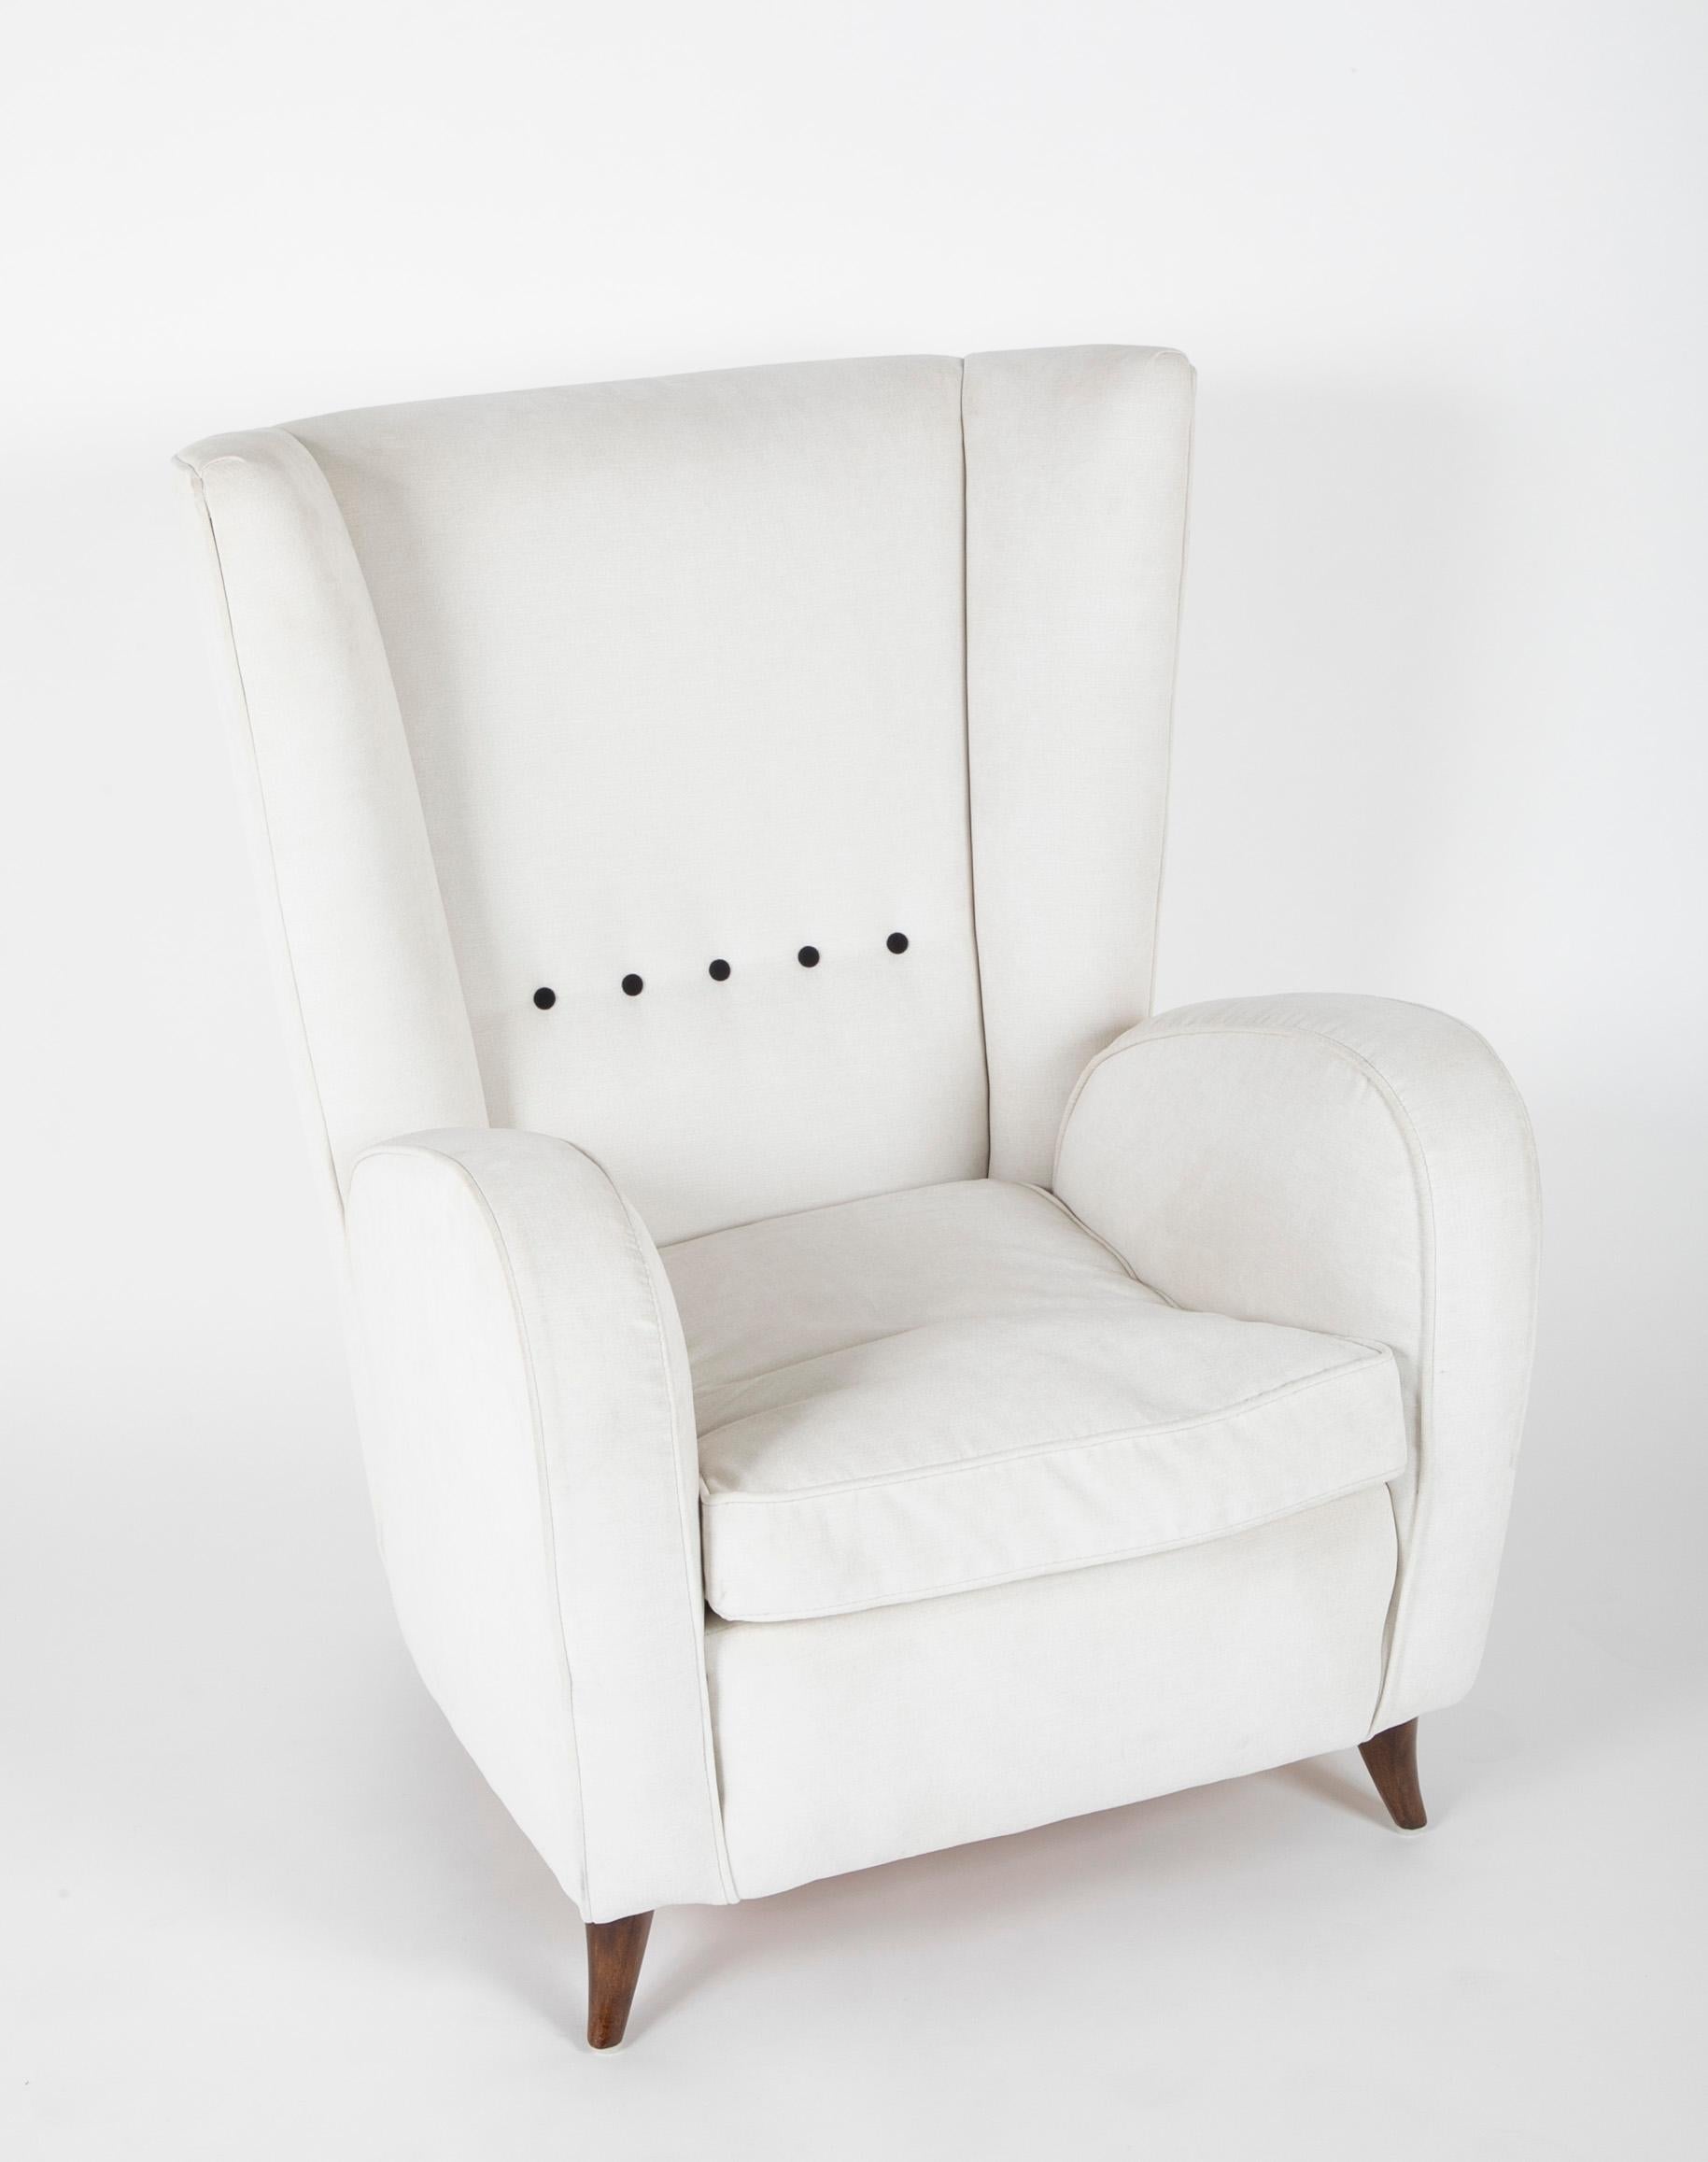 A Fritz Hansen wingback chair upholstered in white fabric having four black buttons.